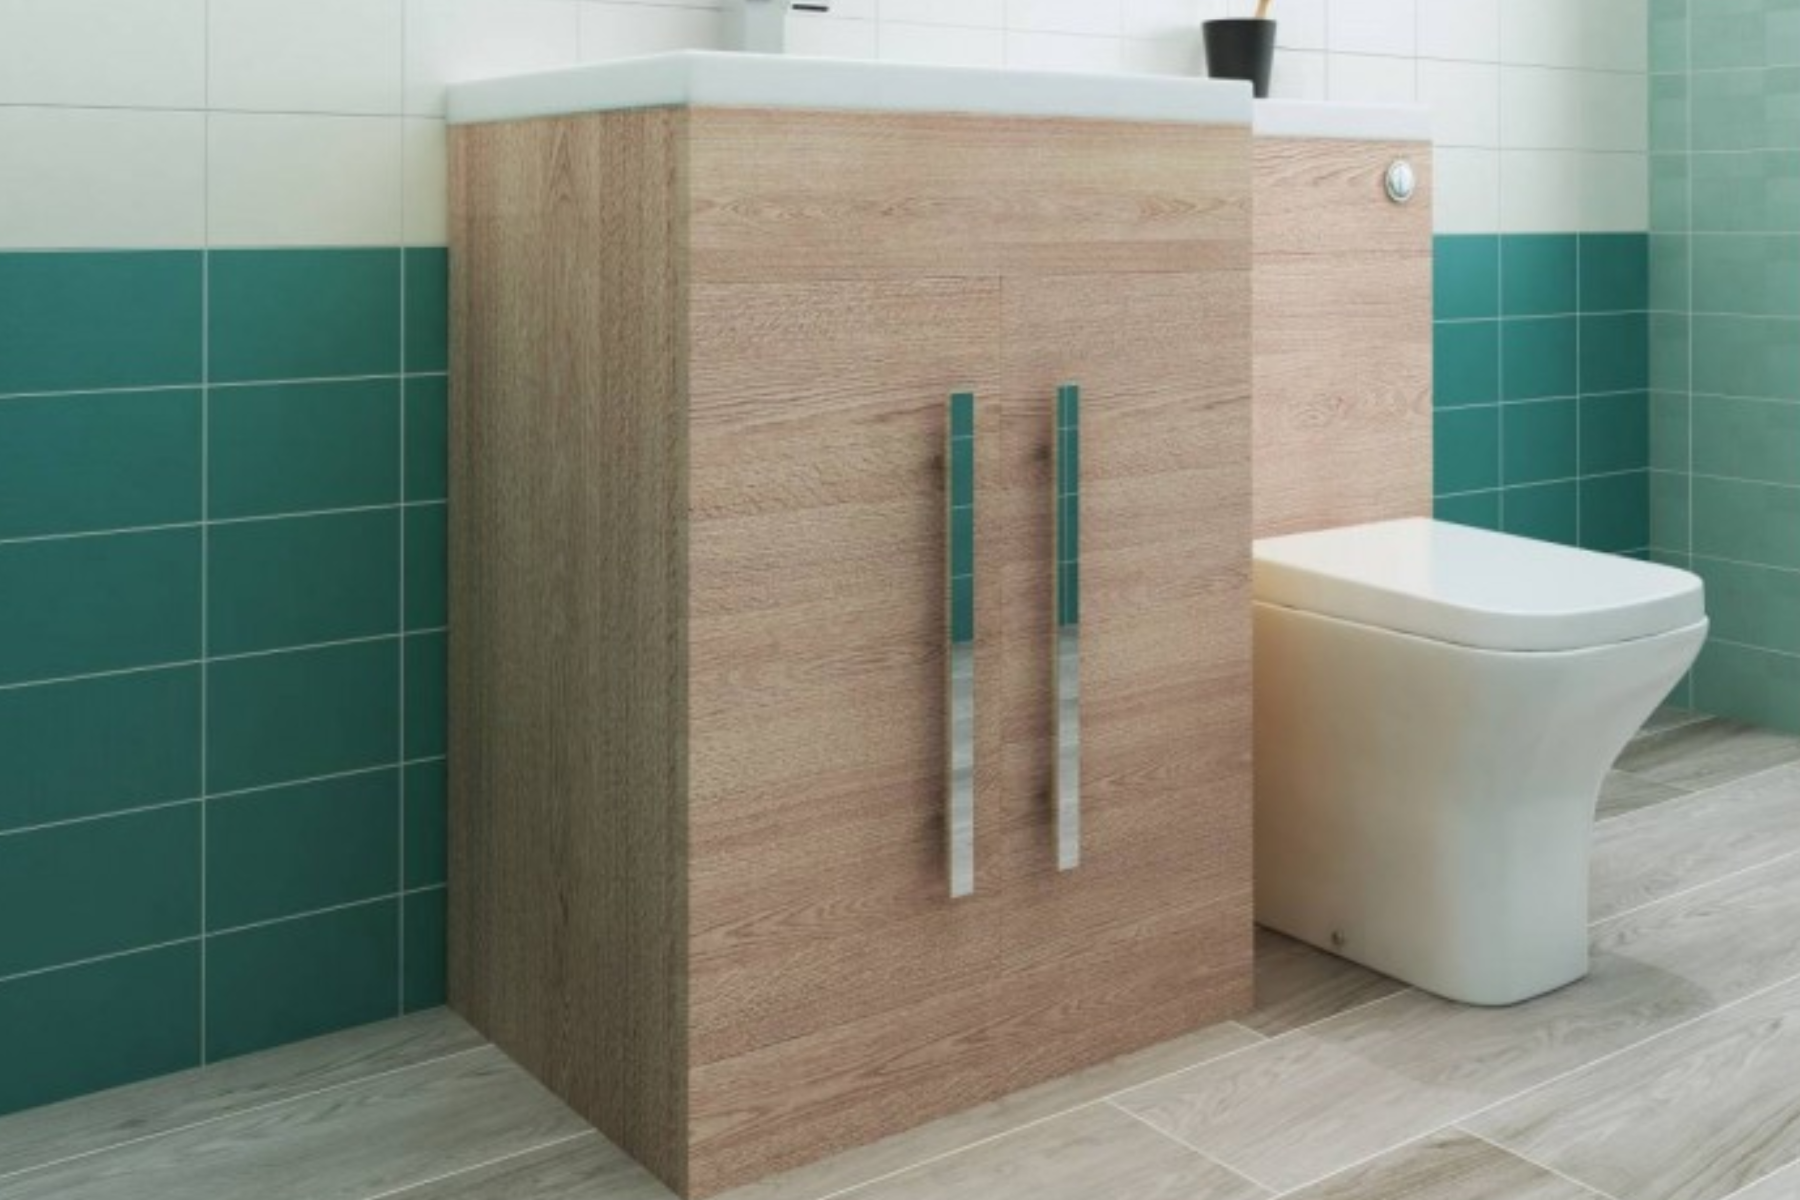 combination toliet and basin set in bathroom setting against green tiled wall